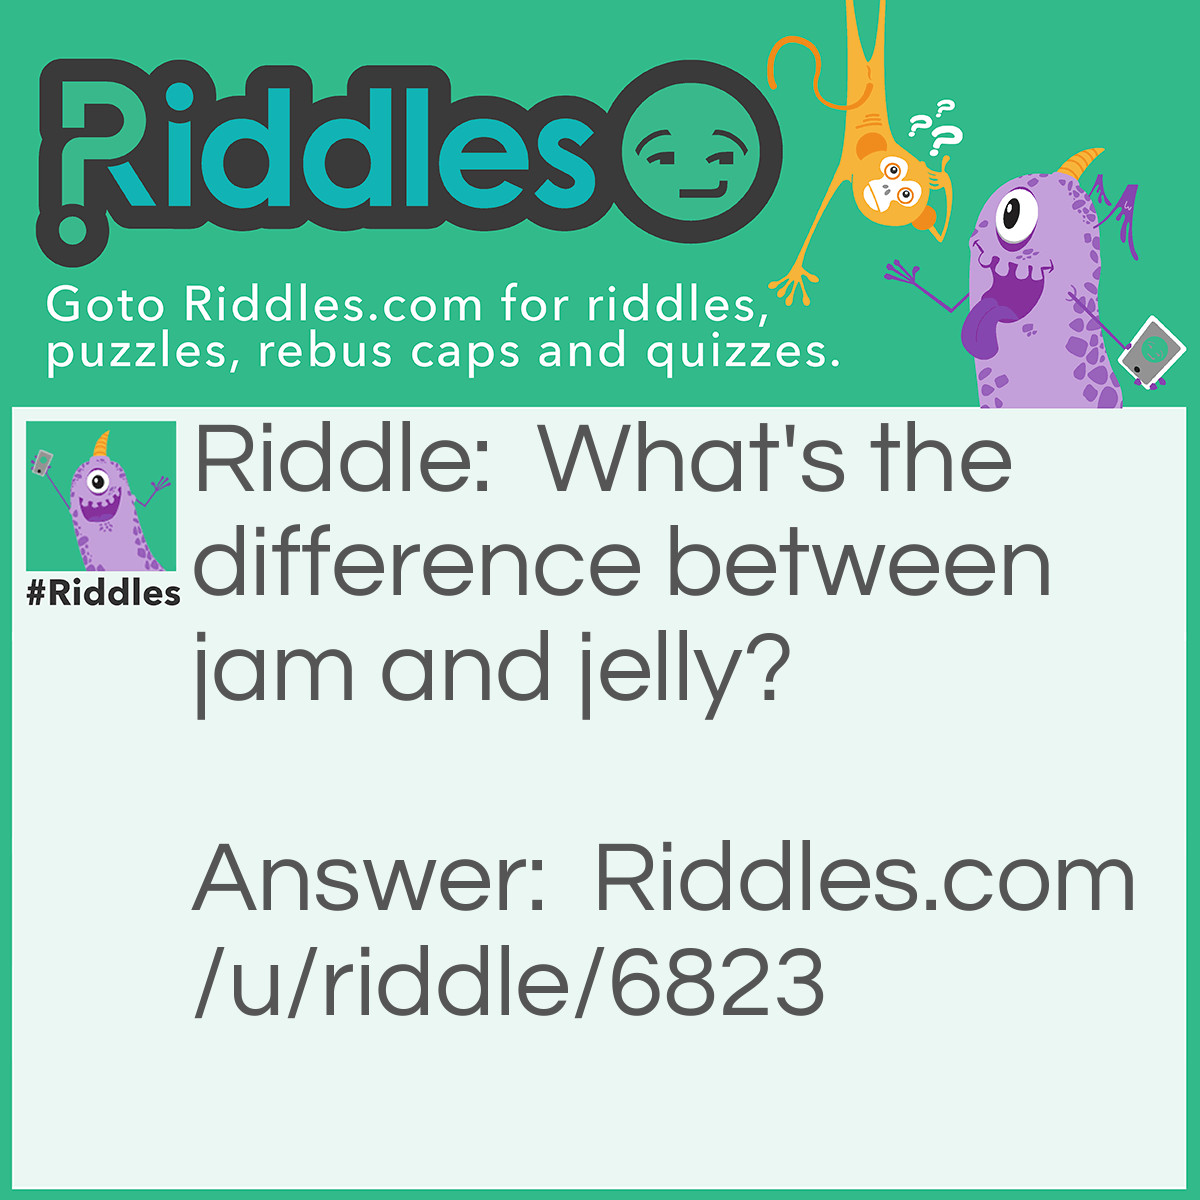 Riddle: What's the difference between jam and jelly? Answer: You don't get a traffic 'jelly' very often.